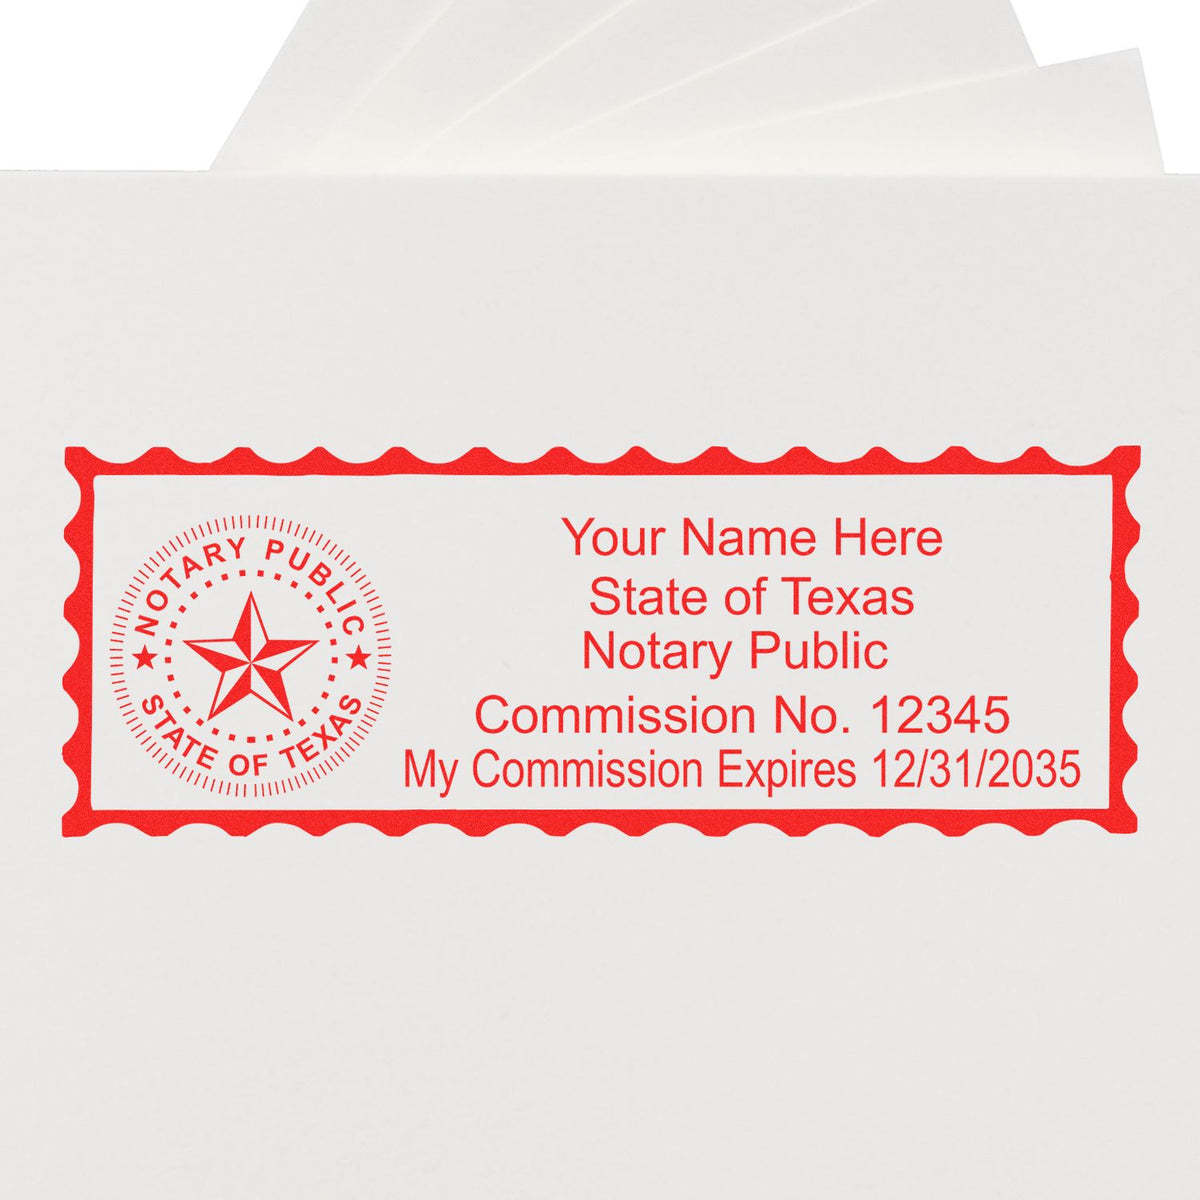 An alternative view of the Slim Pre-Inked State Seal Notary Stamp for Texas stamped on a sheet of paper showing the image in use